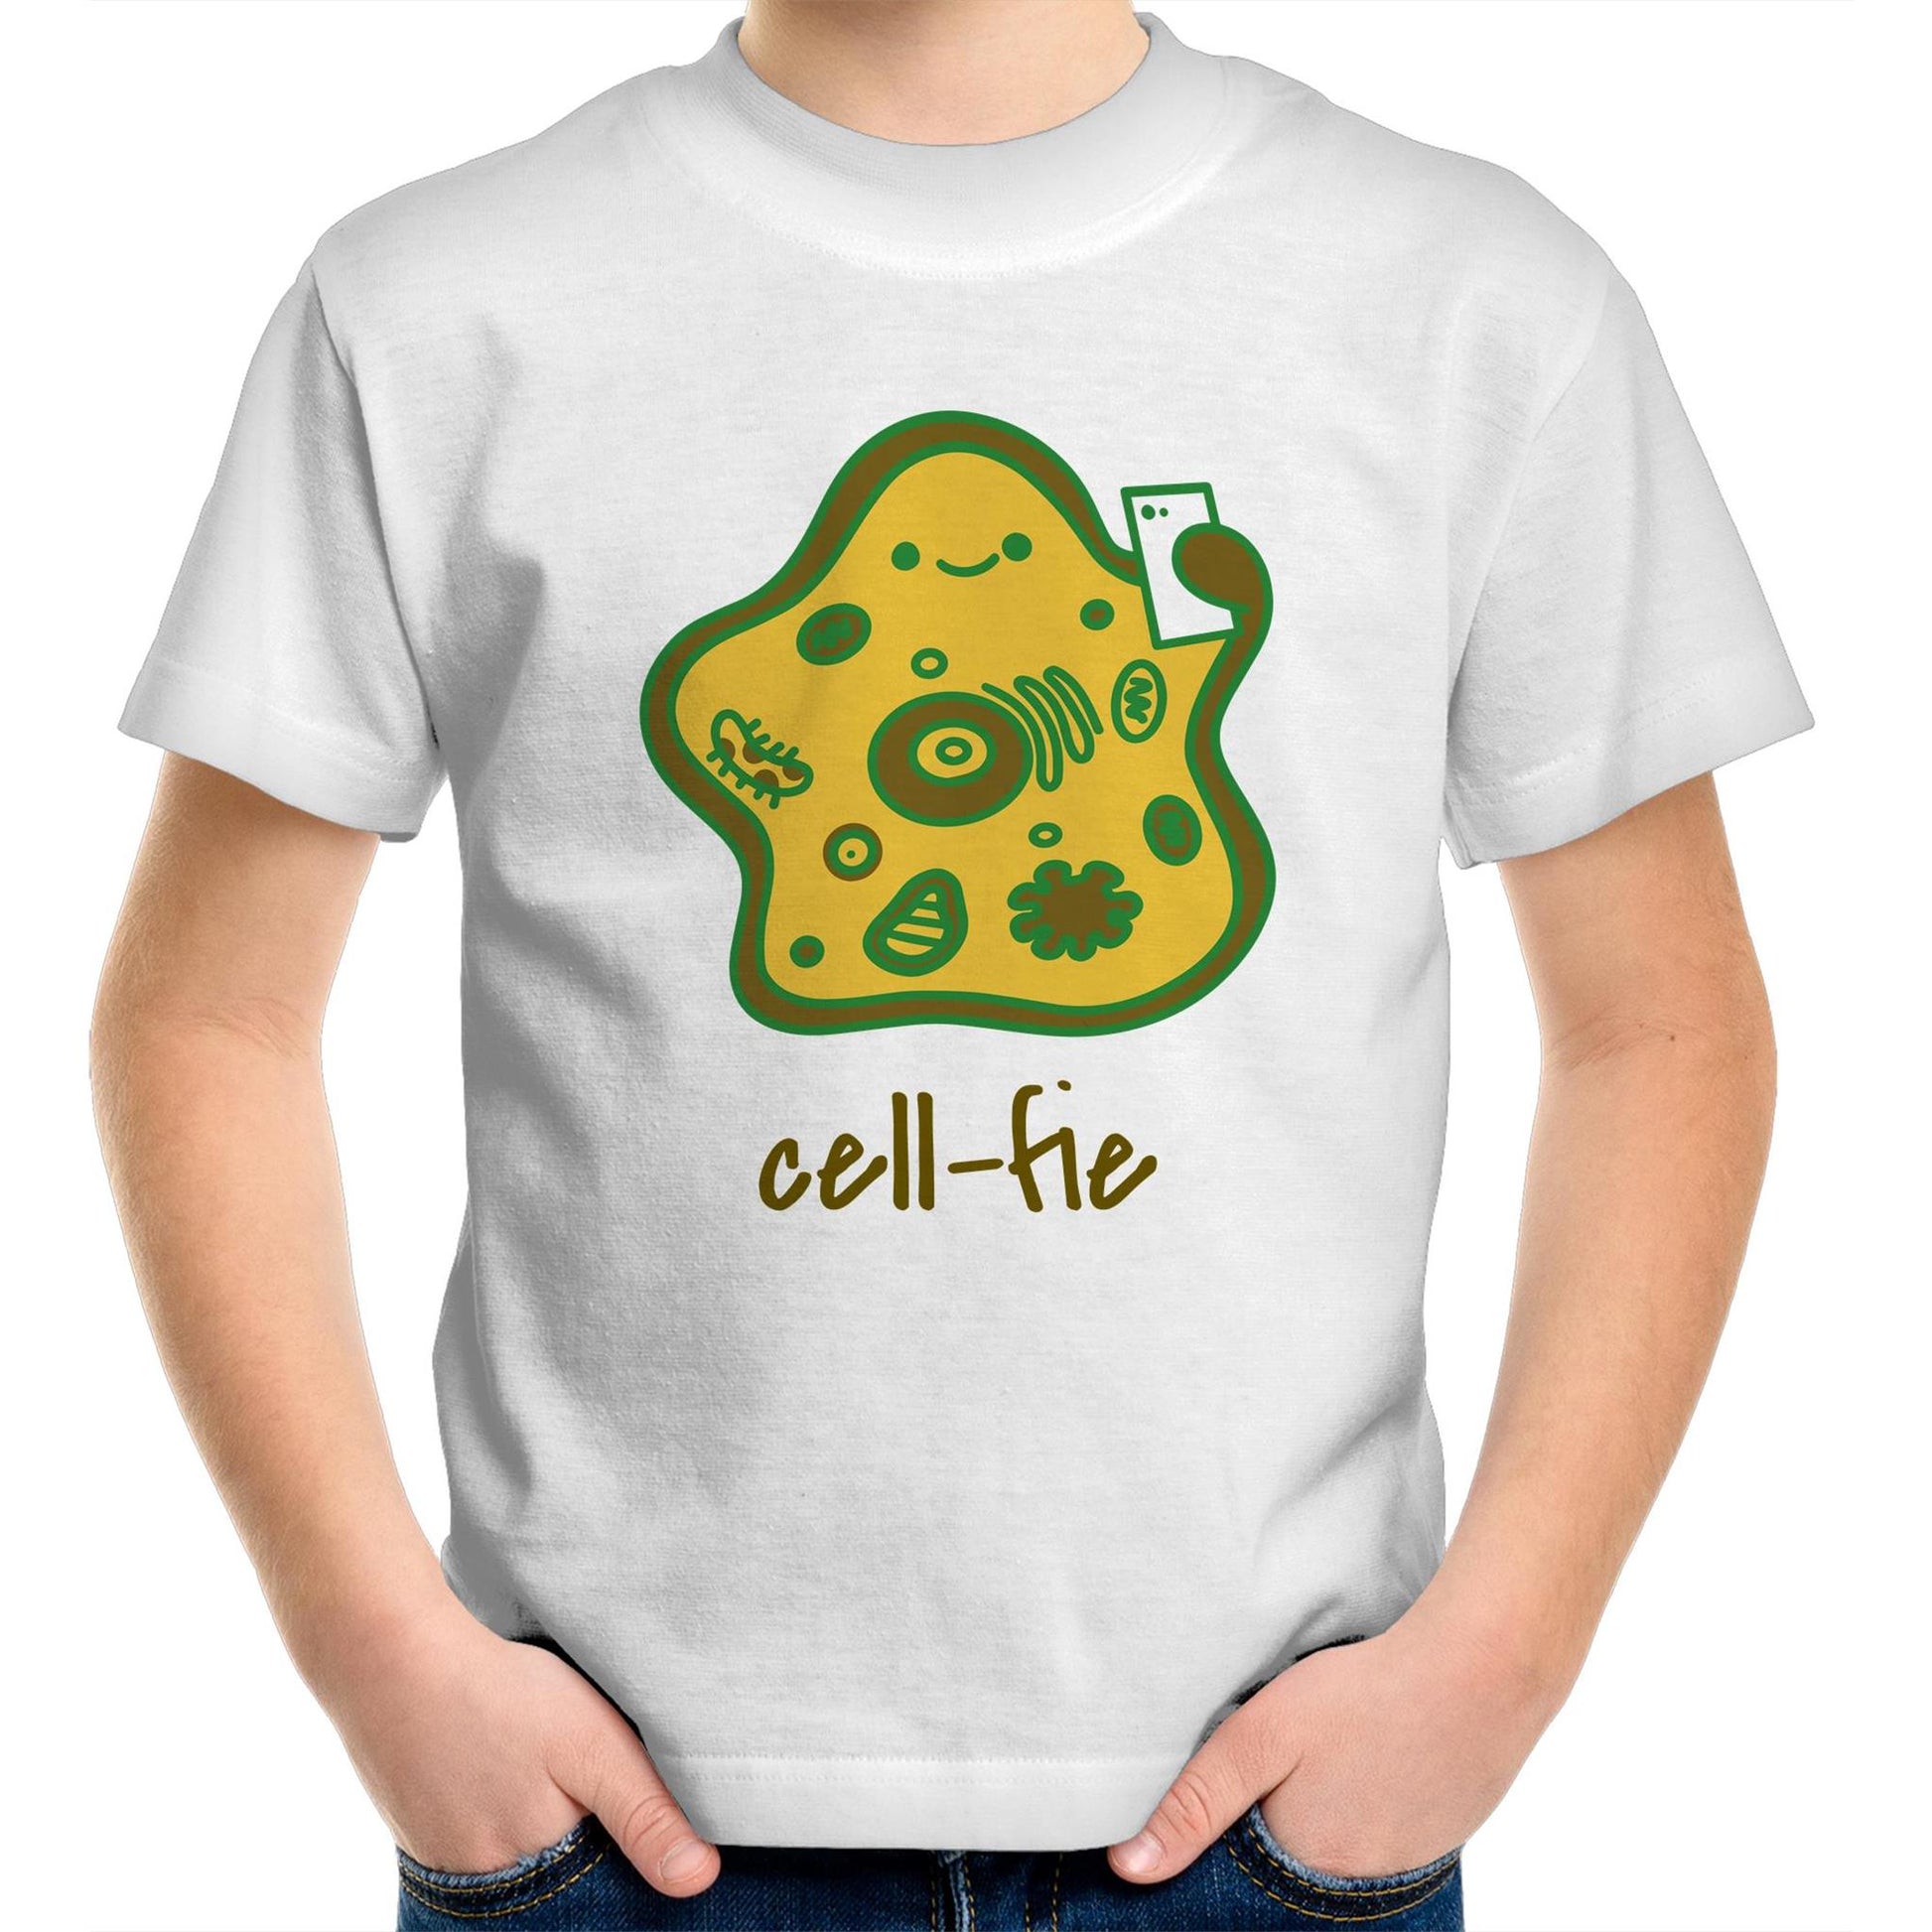 Cell-fie - Kids Youth Crew T-Shirt White Kids Youth T-shirt Science